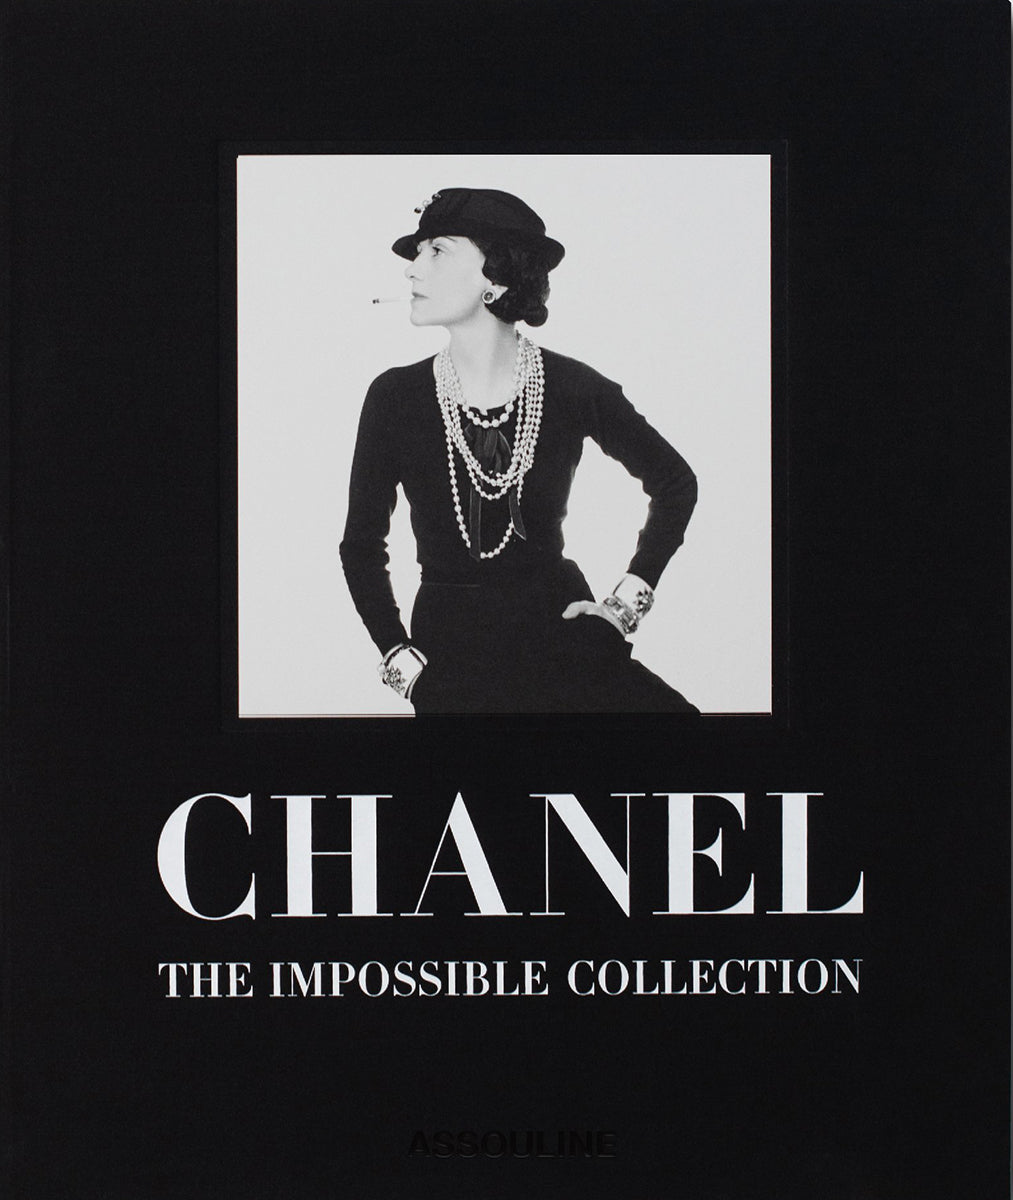 The Impossible Collection of Chanel